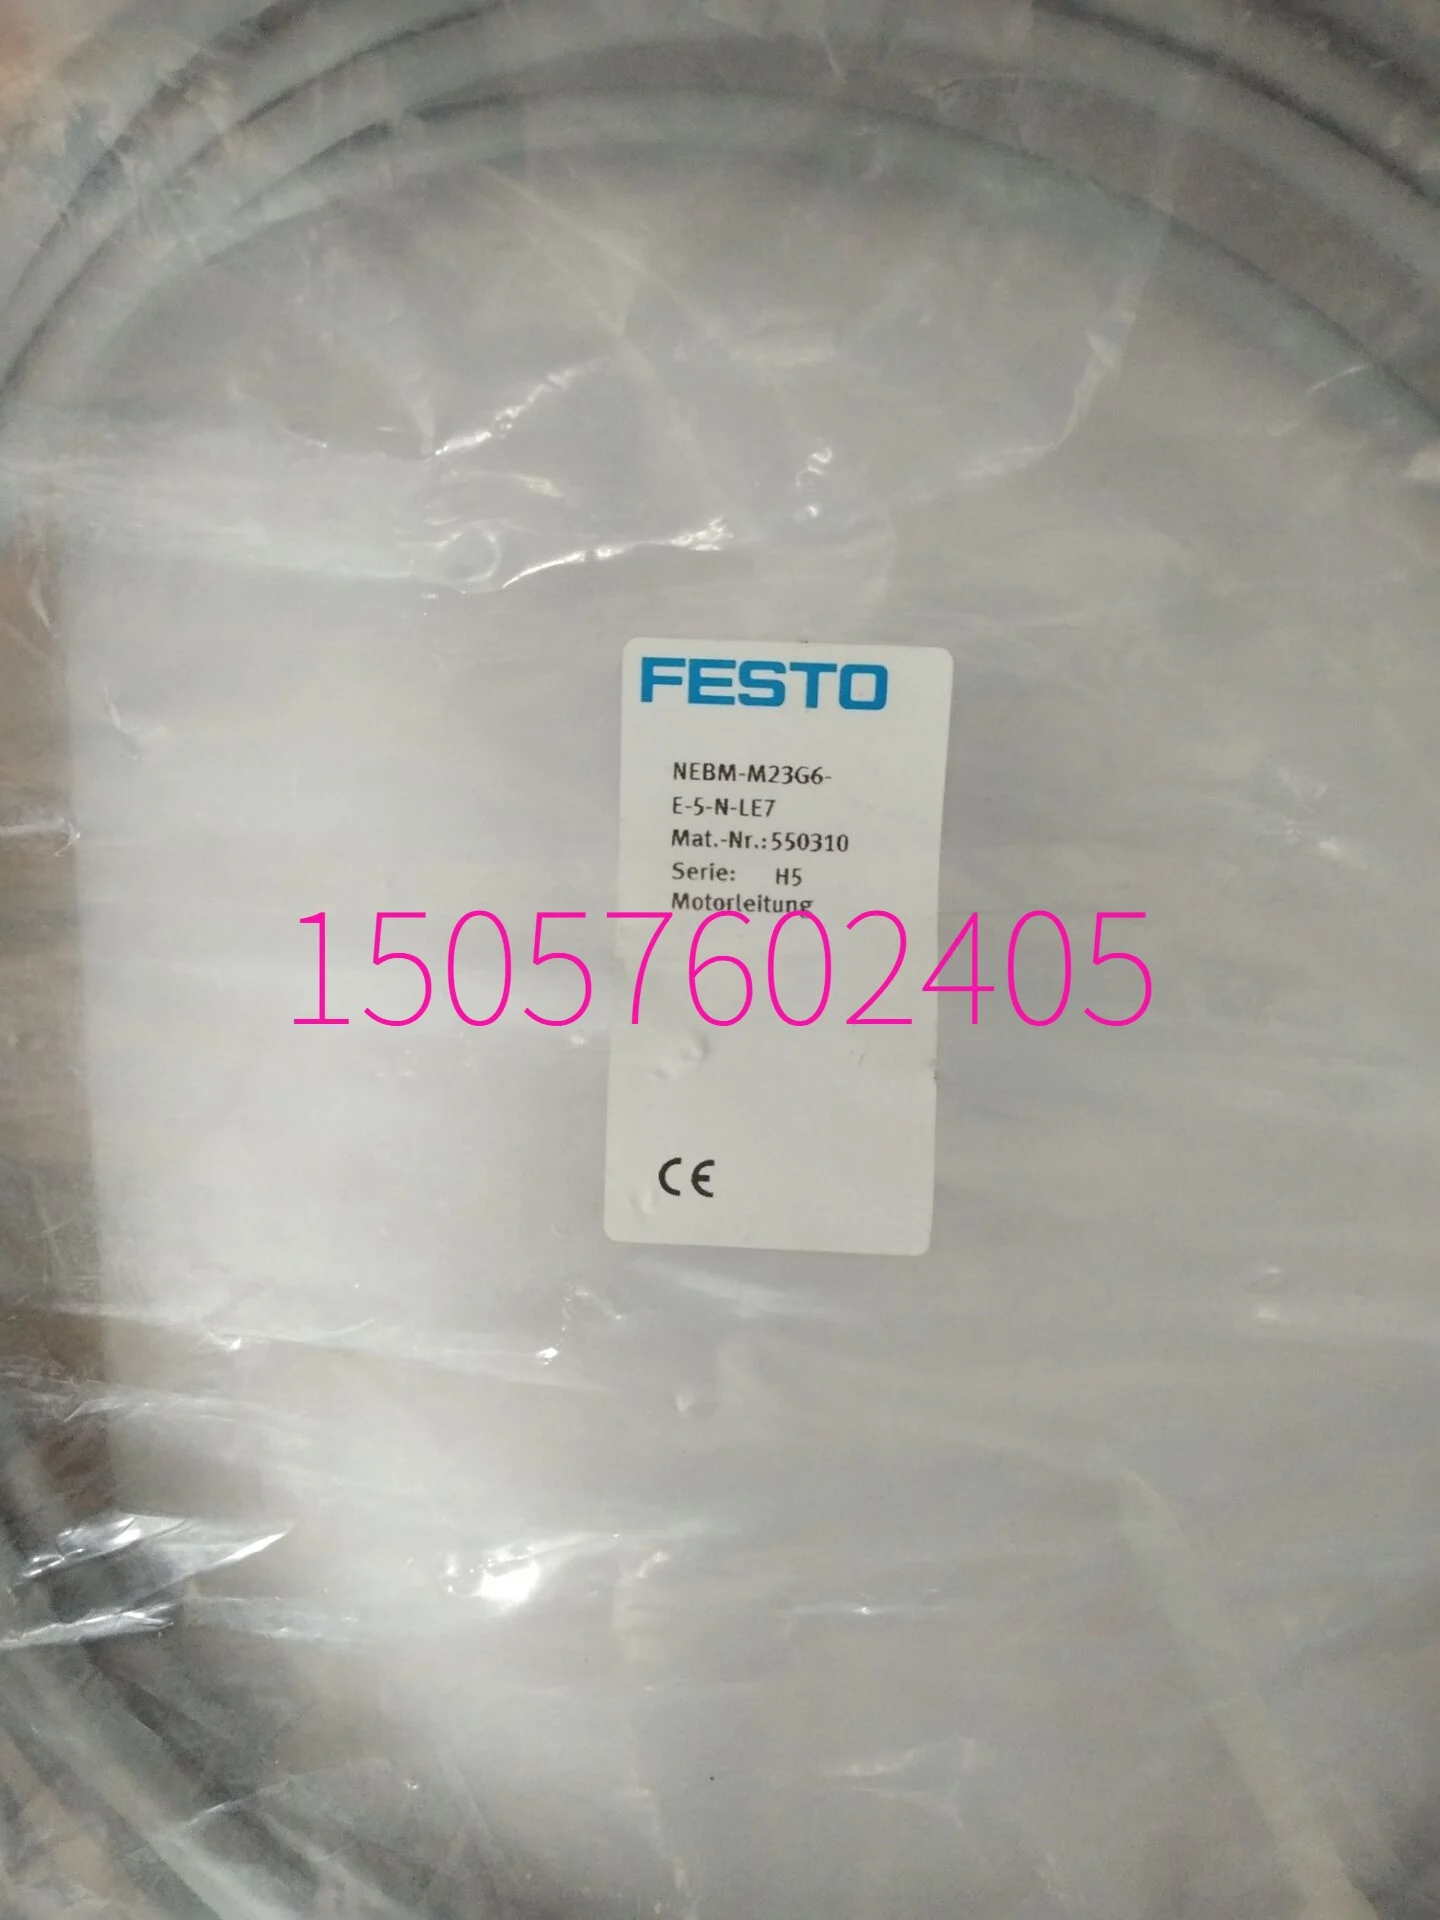 

Festo Motor Cable NEBM-M23G6-E-5-N-LE7 550310 Is In Stock